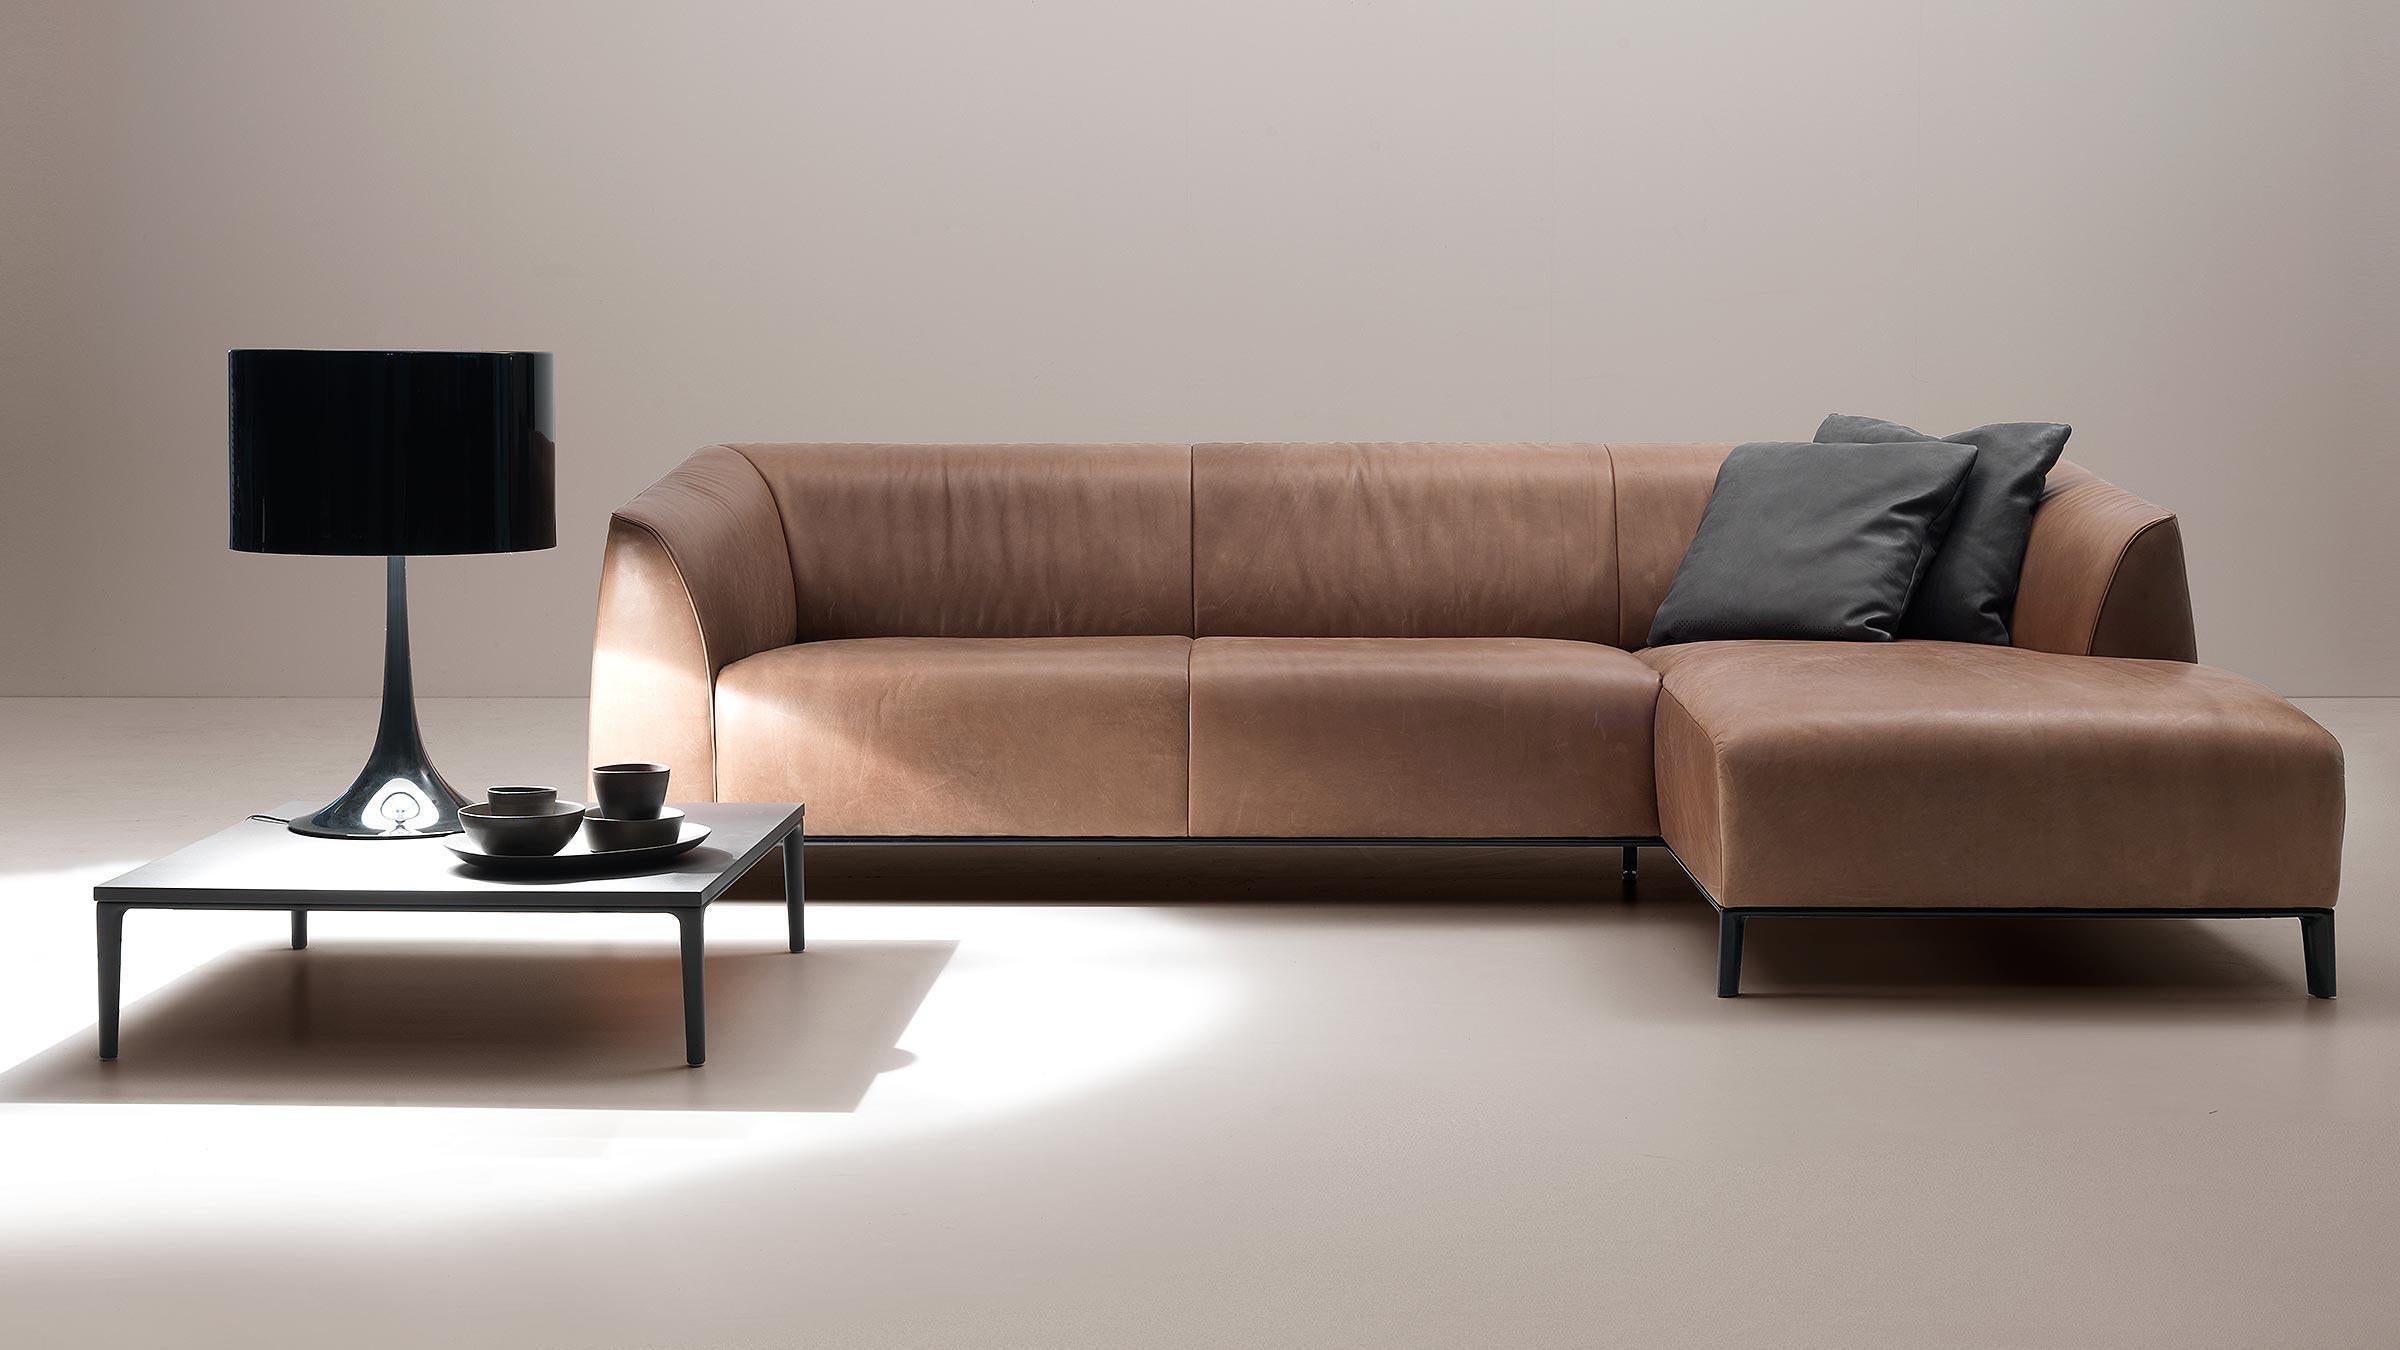 Generously curved, taut surfaces in a very soft implementation are the basic ideas of Christian Werner, as he designs the image of the DS-276 slowly in front of his inner eye; what at first appears as a contradiction makes the charm of a dream sofa.